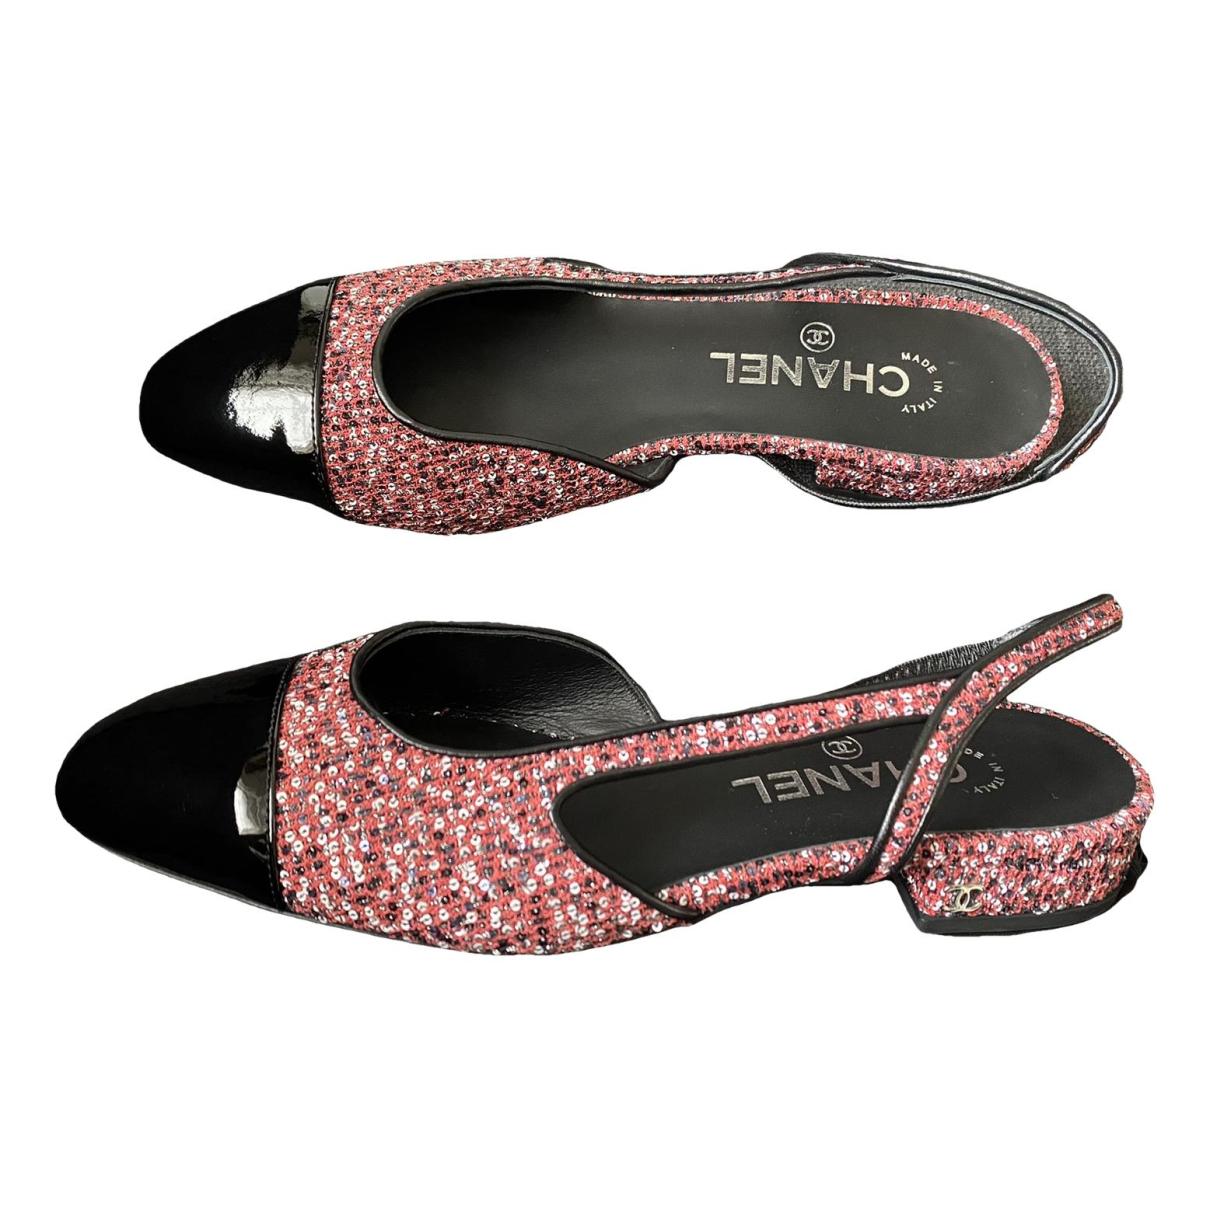 CHANEL, Shoes, Chanel Slingback Pumps Pink Tweed With Black Toe